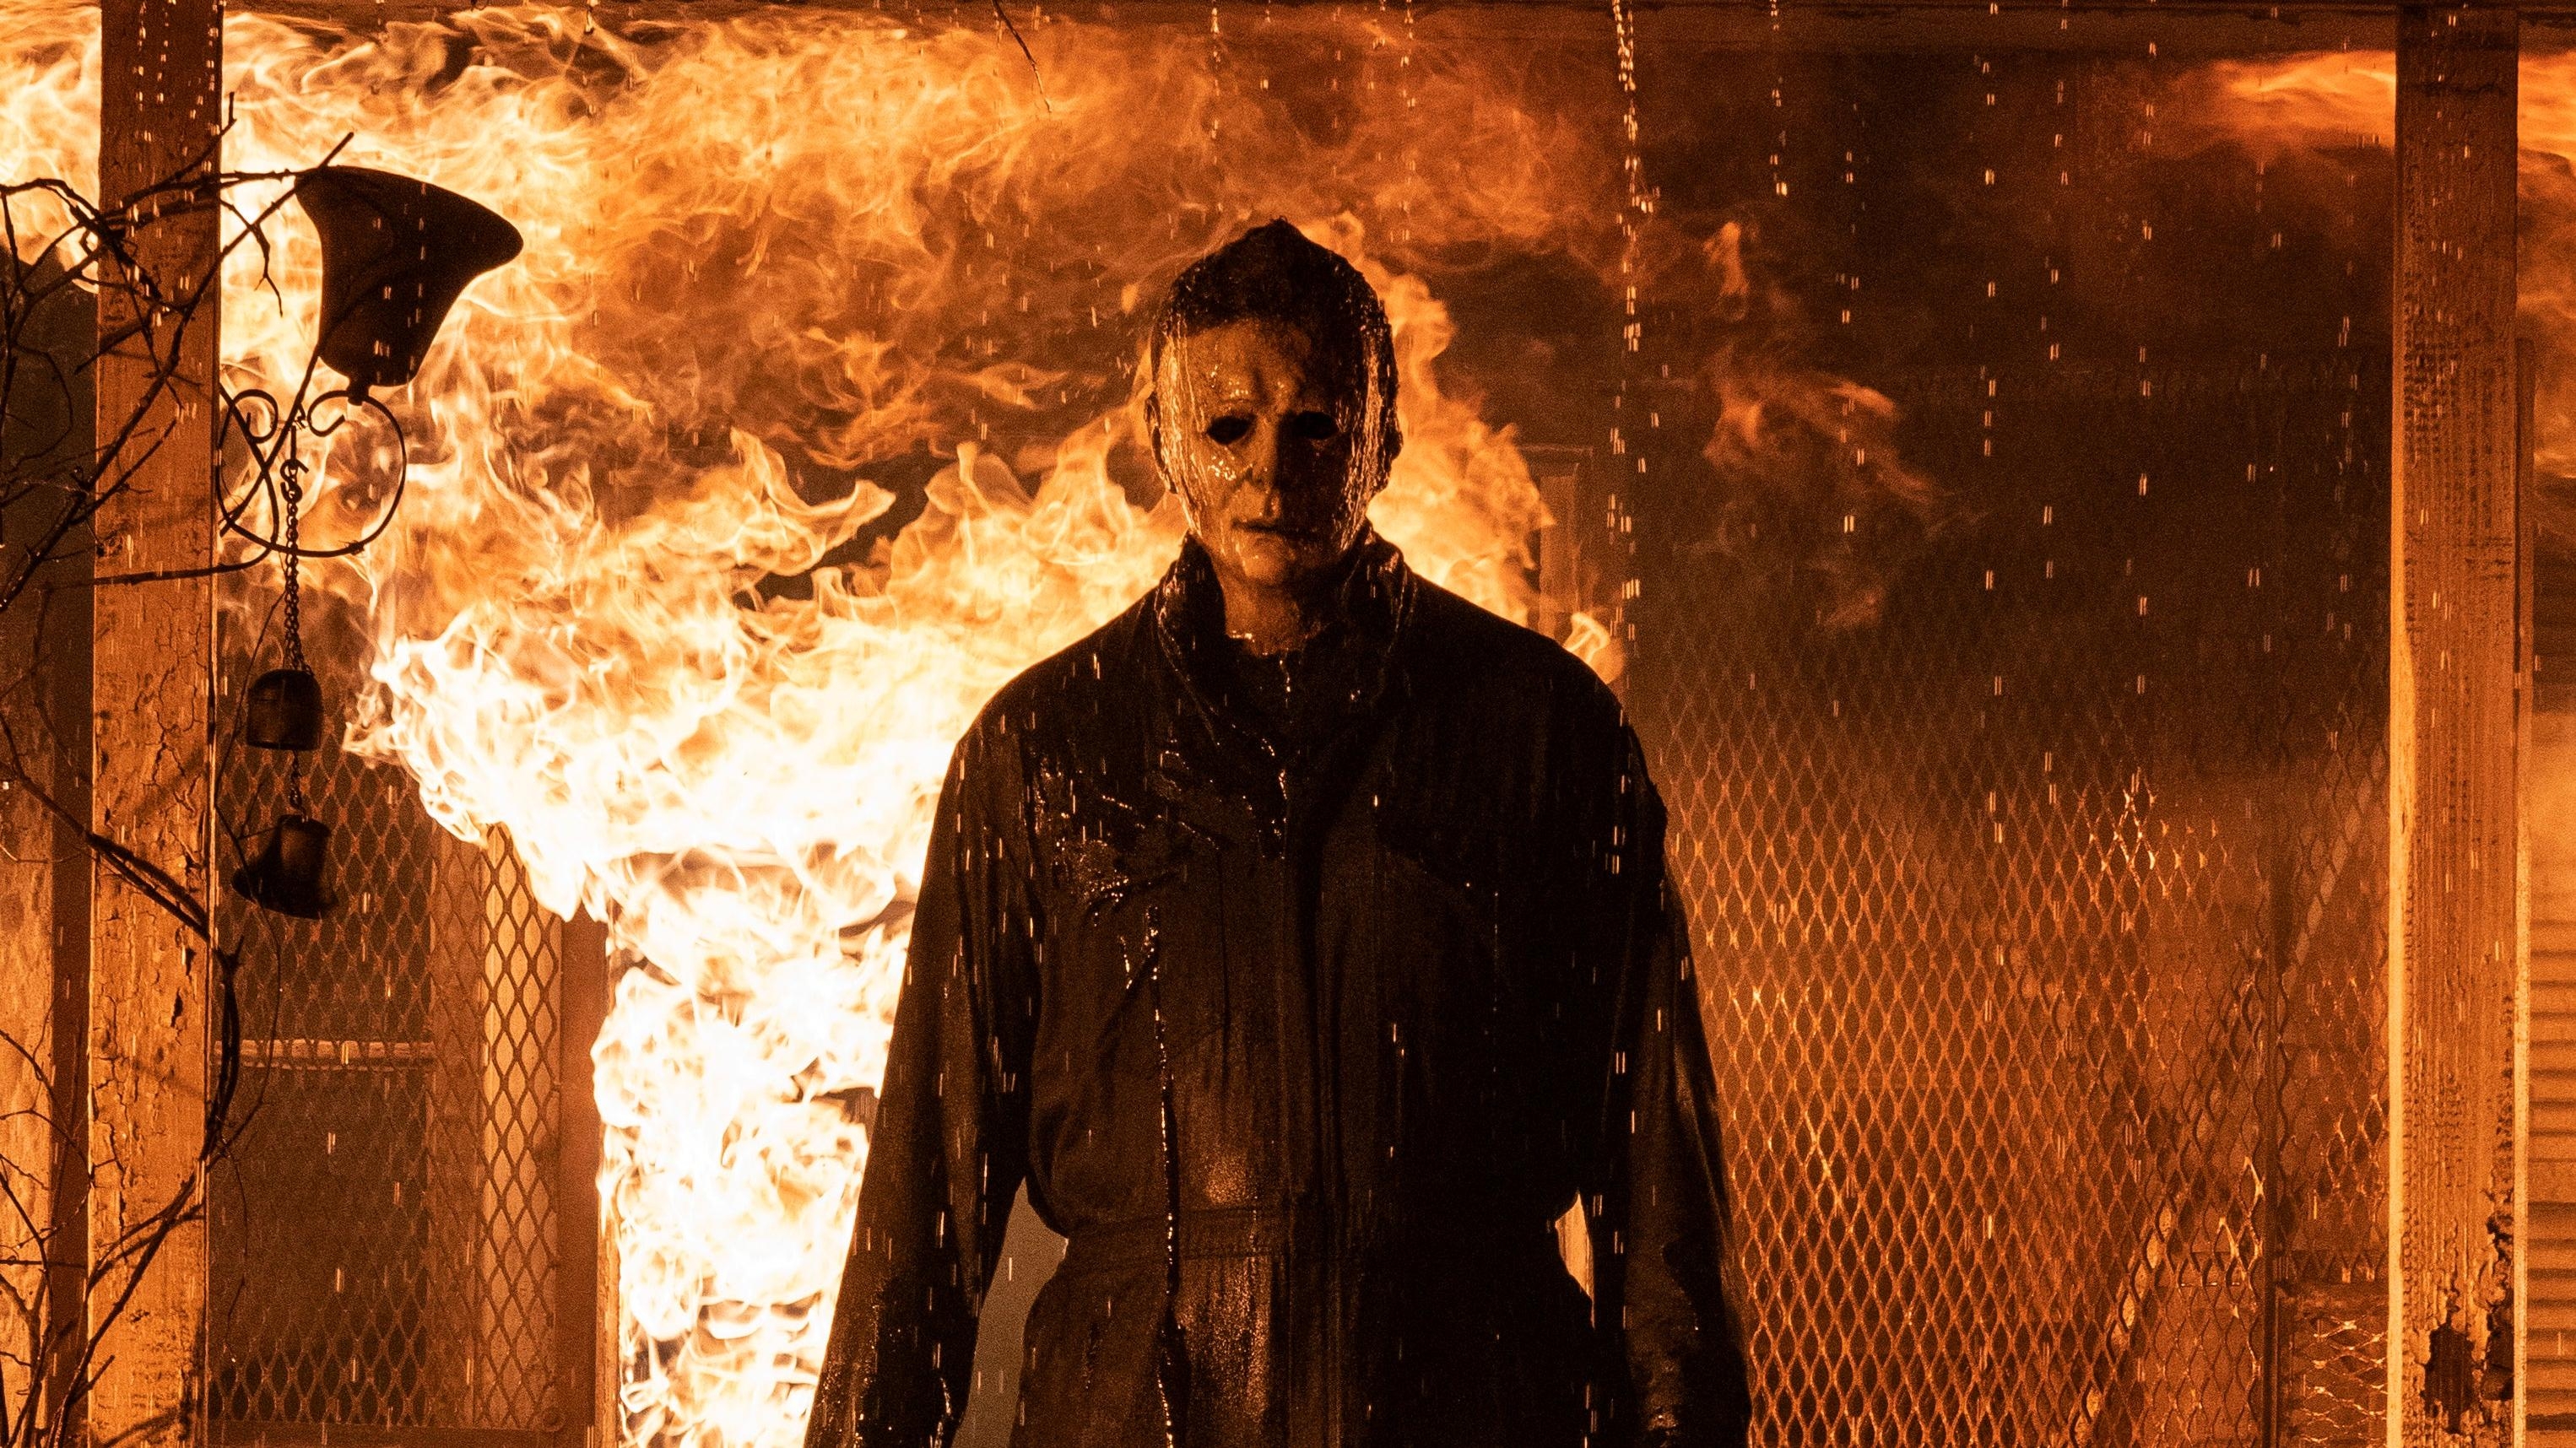 David Gordon Green says Halloween Ends will deal with the pandemic and “peculiar politics”